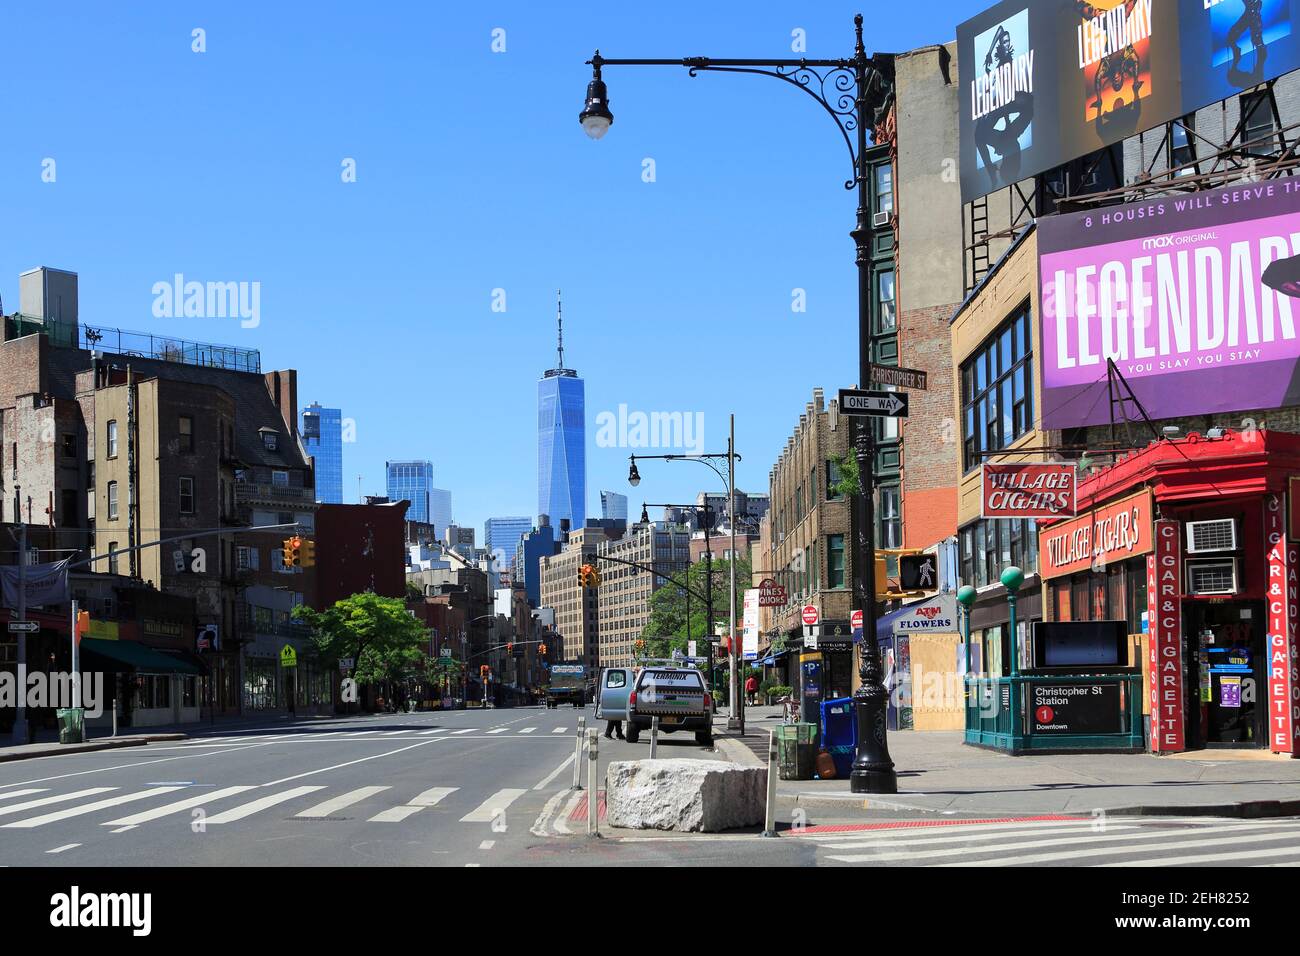 Seventh Avenue South empty with no traffic during coronavirus, Covid-19 pandemic, view of 1 World Trade Center, West Village, Greenwich Village, Manhattan, New York City, USA June 2020 Stock Photo